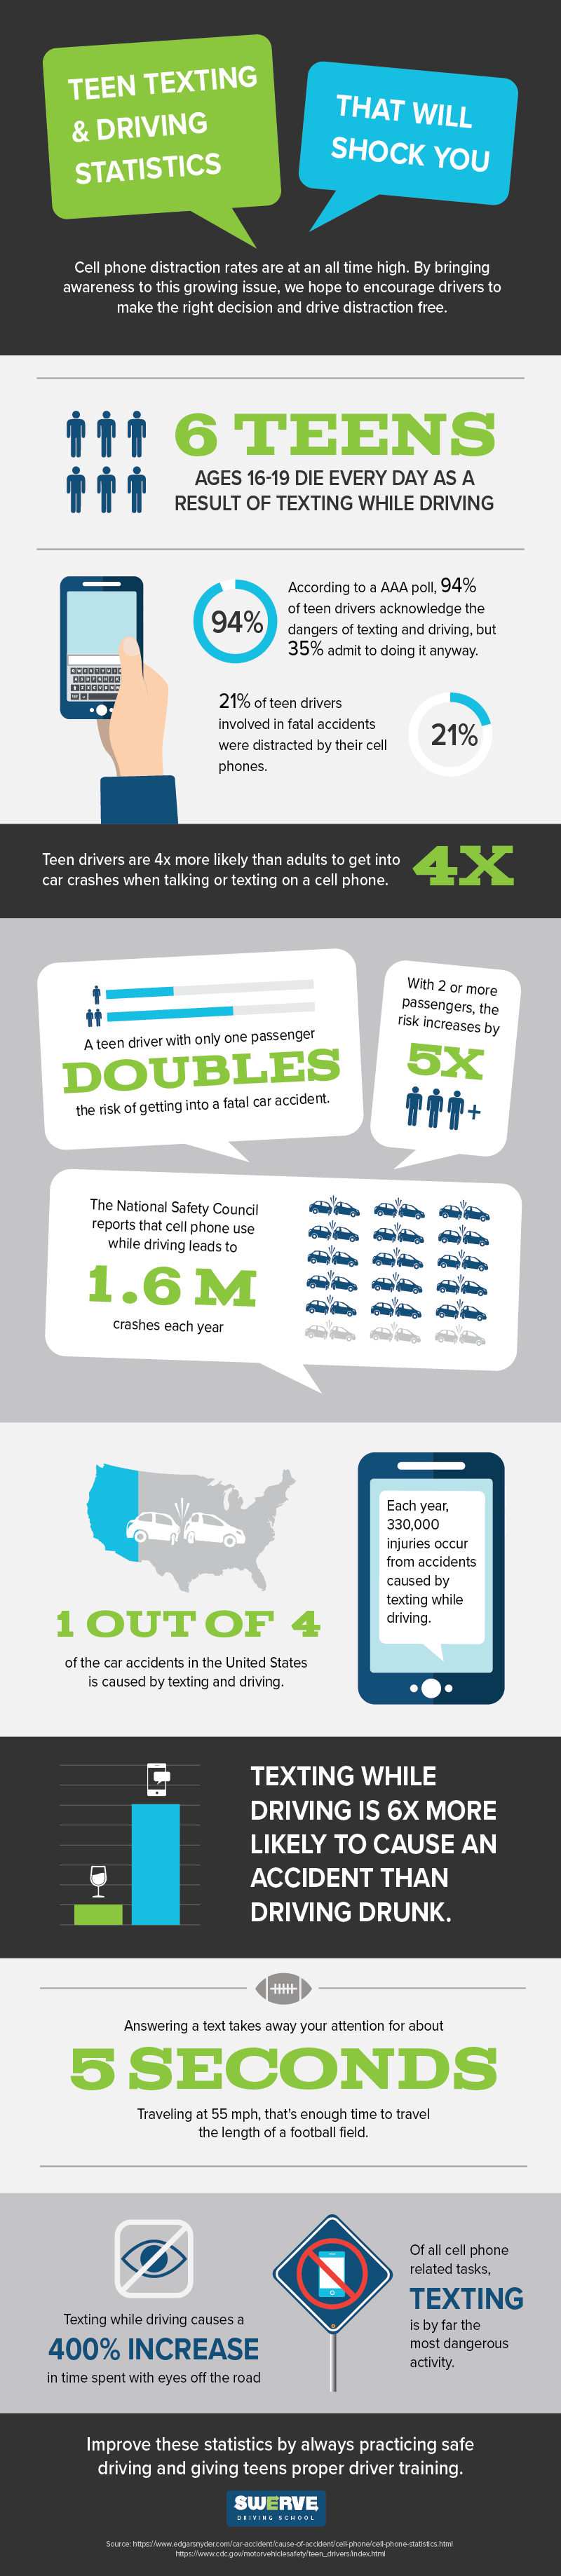 Teen Texting & Driving Statistics Infographic | Swerve Driving School